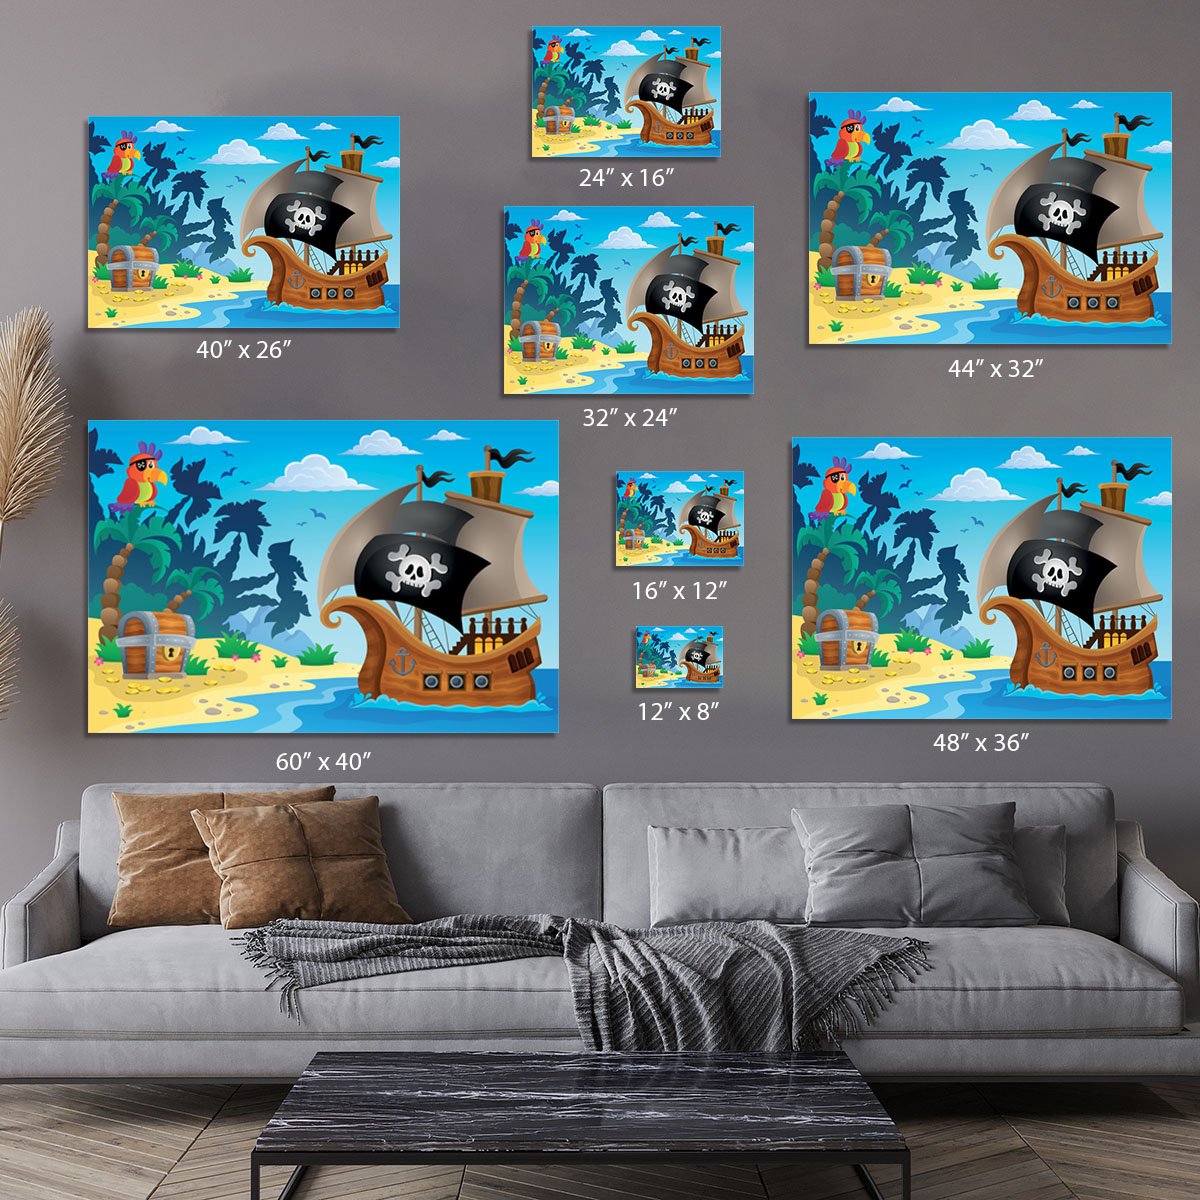 Pirate ship topic image 5 Canvas Print or Poster